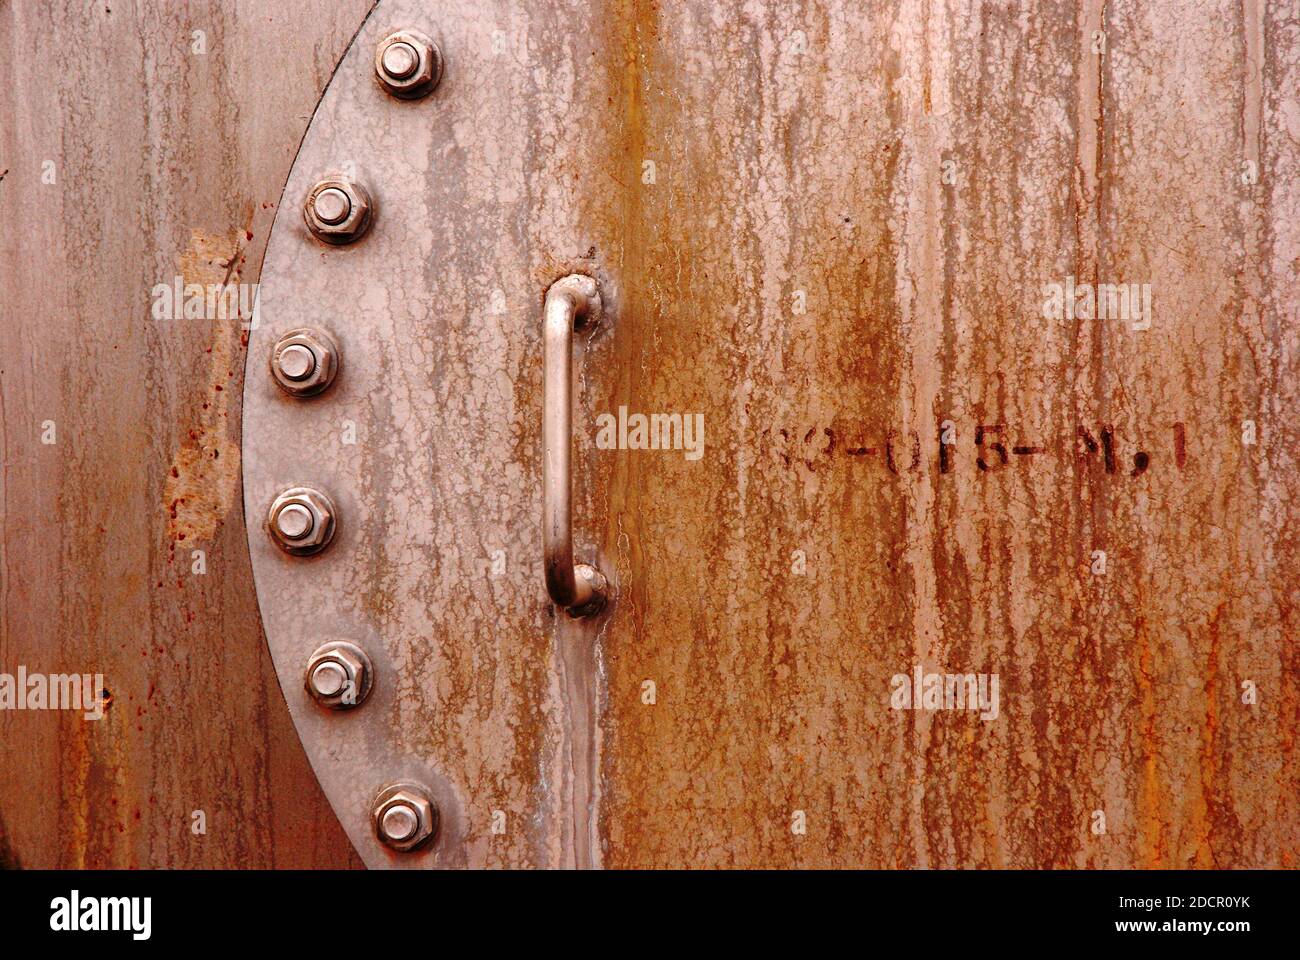 Industrial shapes brown, rustic and rusty tones Stock Photo